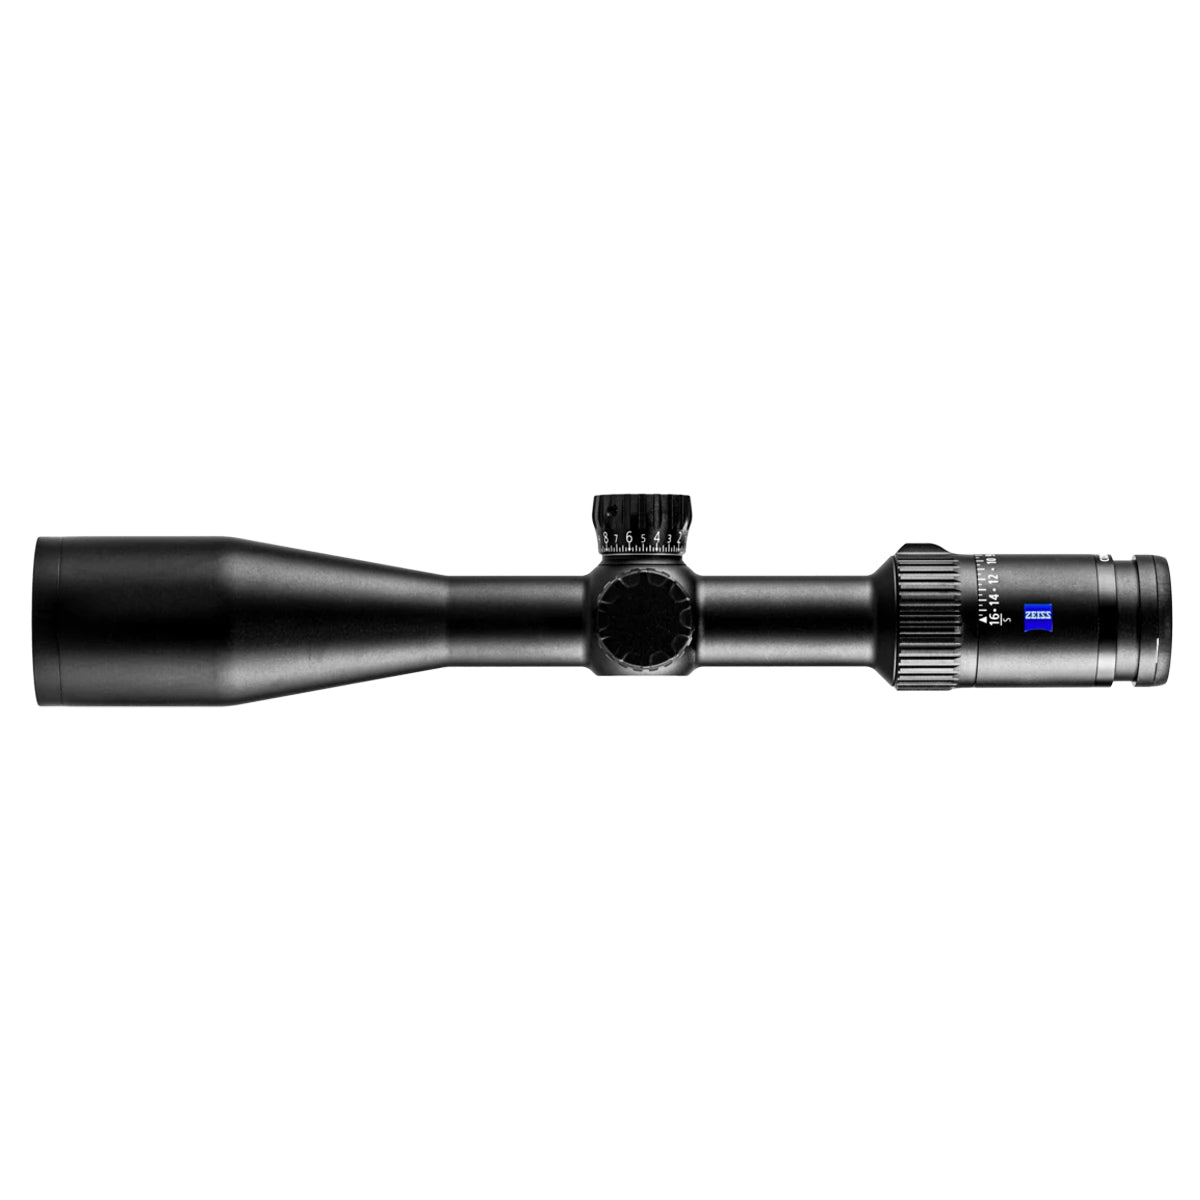 Zeiss Conquest V4 4-16x44 w/ ZBi Illuminated #68 Reticle Rifle Scope in  by GOHUNT | Zeiss - GOHUNT Shop